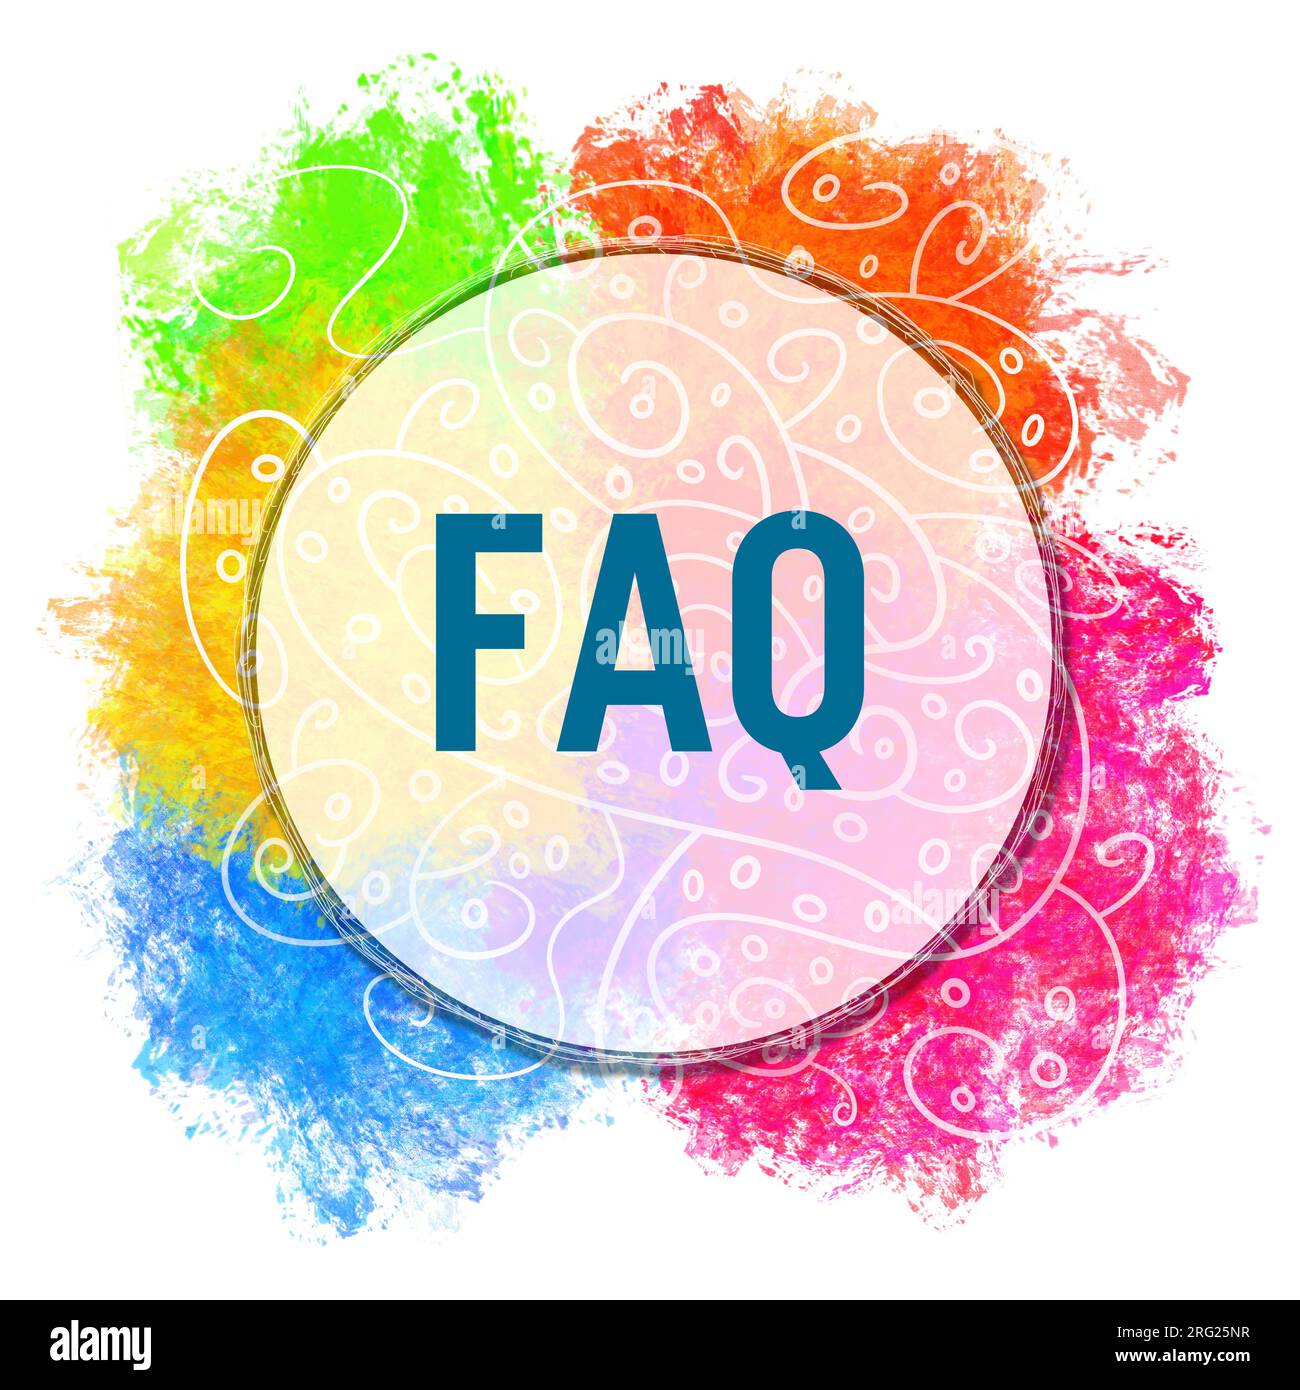 FAQ - Frequently Asked Questions Colorful Spatter Abstract Doodle Element Text Stock Photo